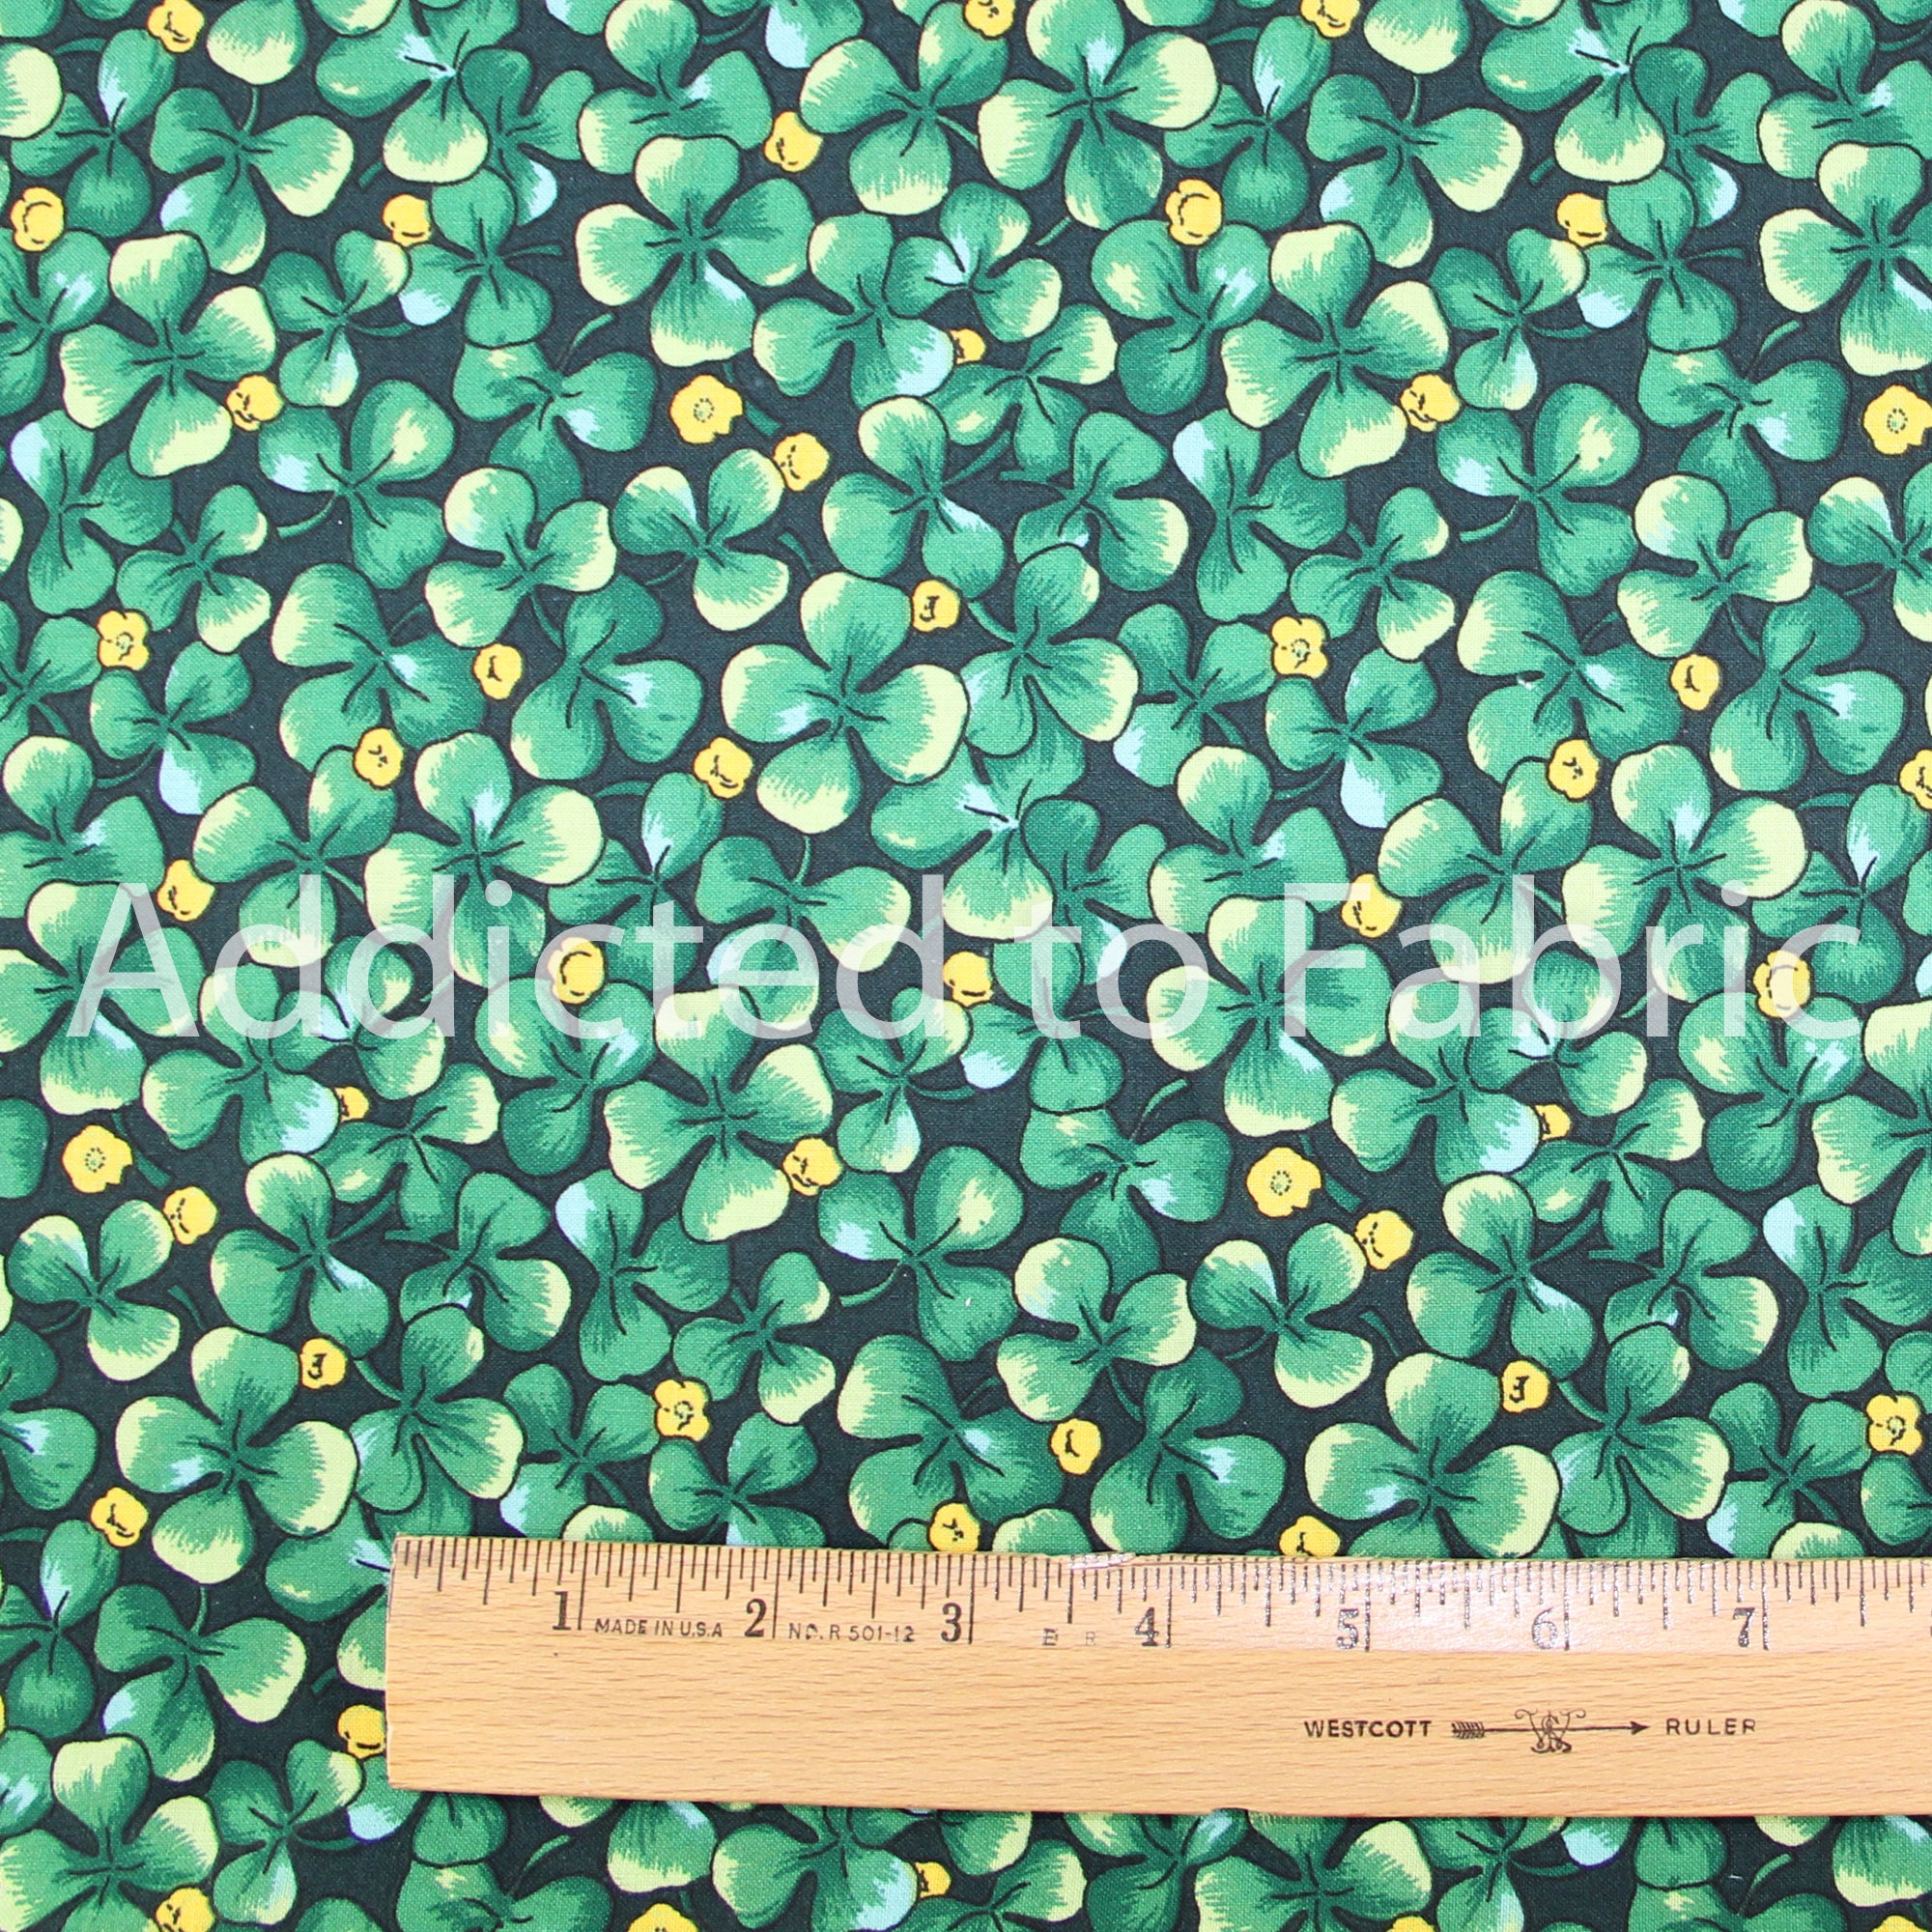 St. Patrick's Day Fabric by the Yard or Half Yard, Clovers on Black ...